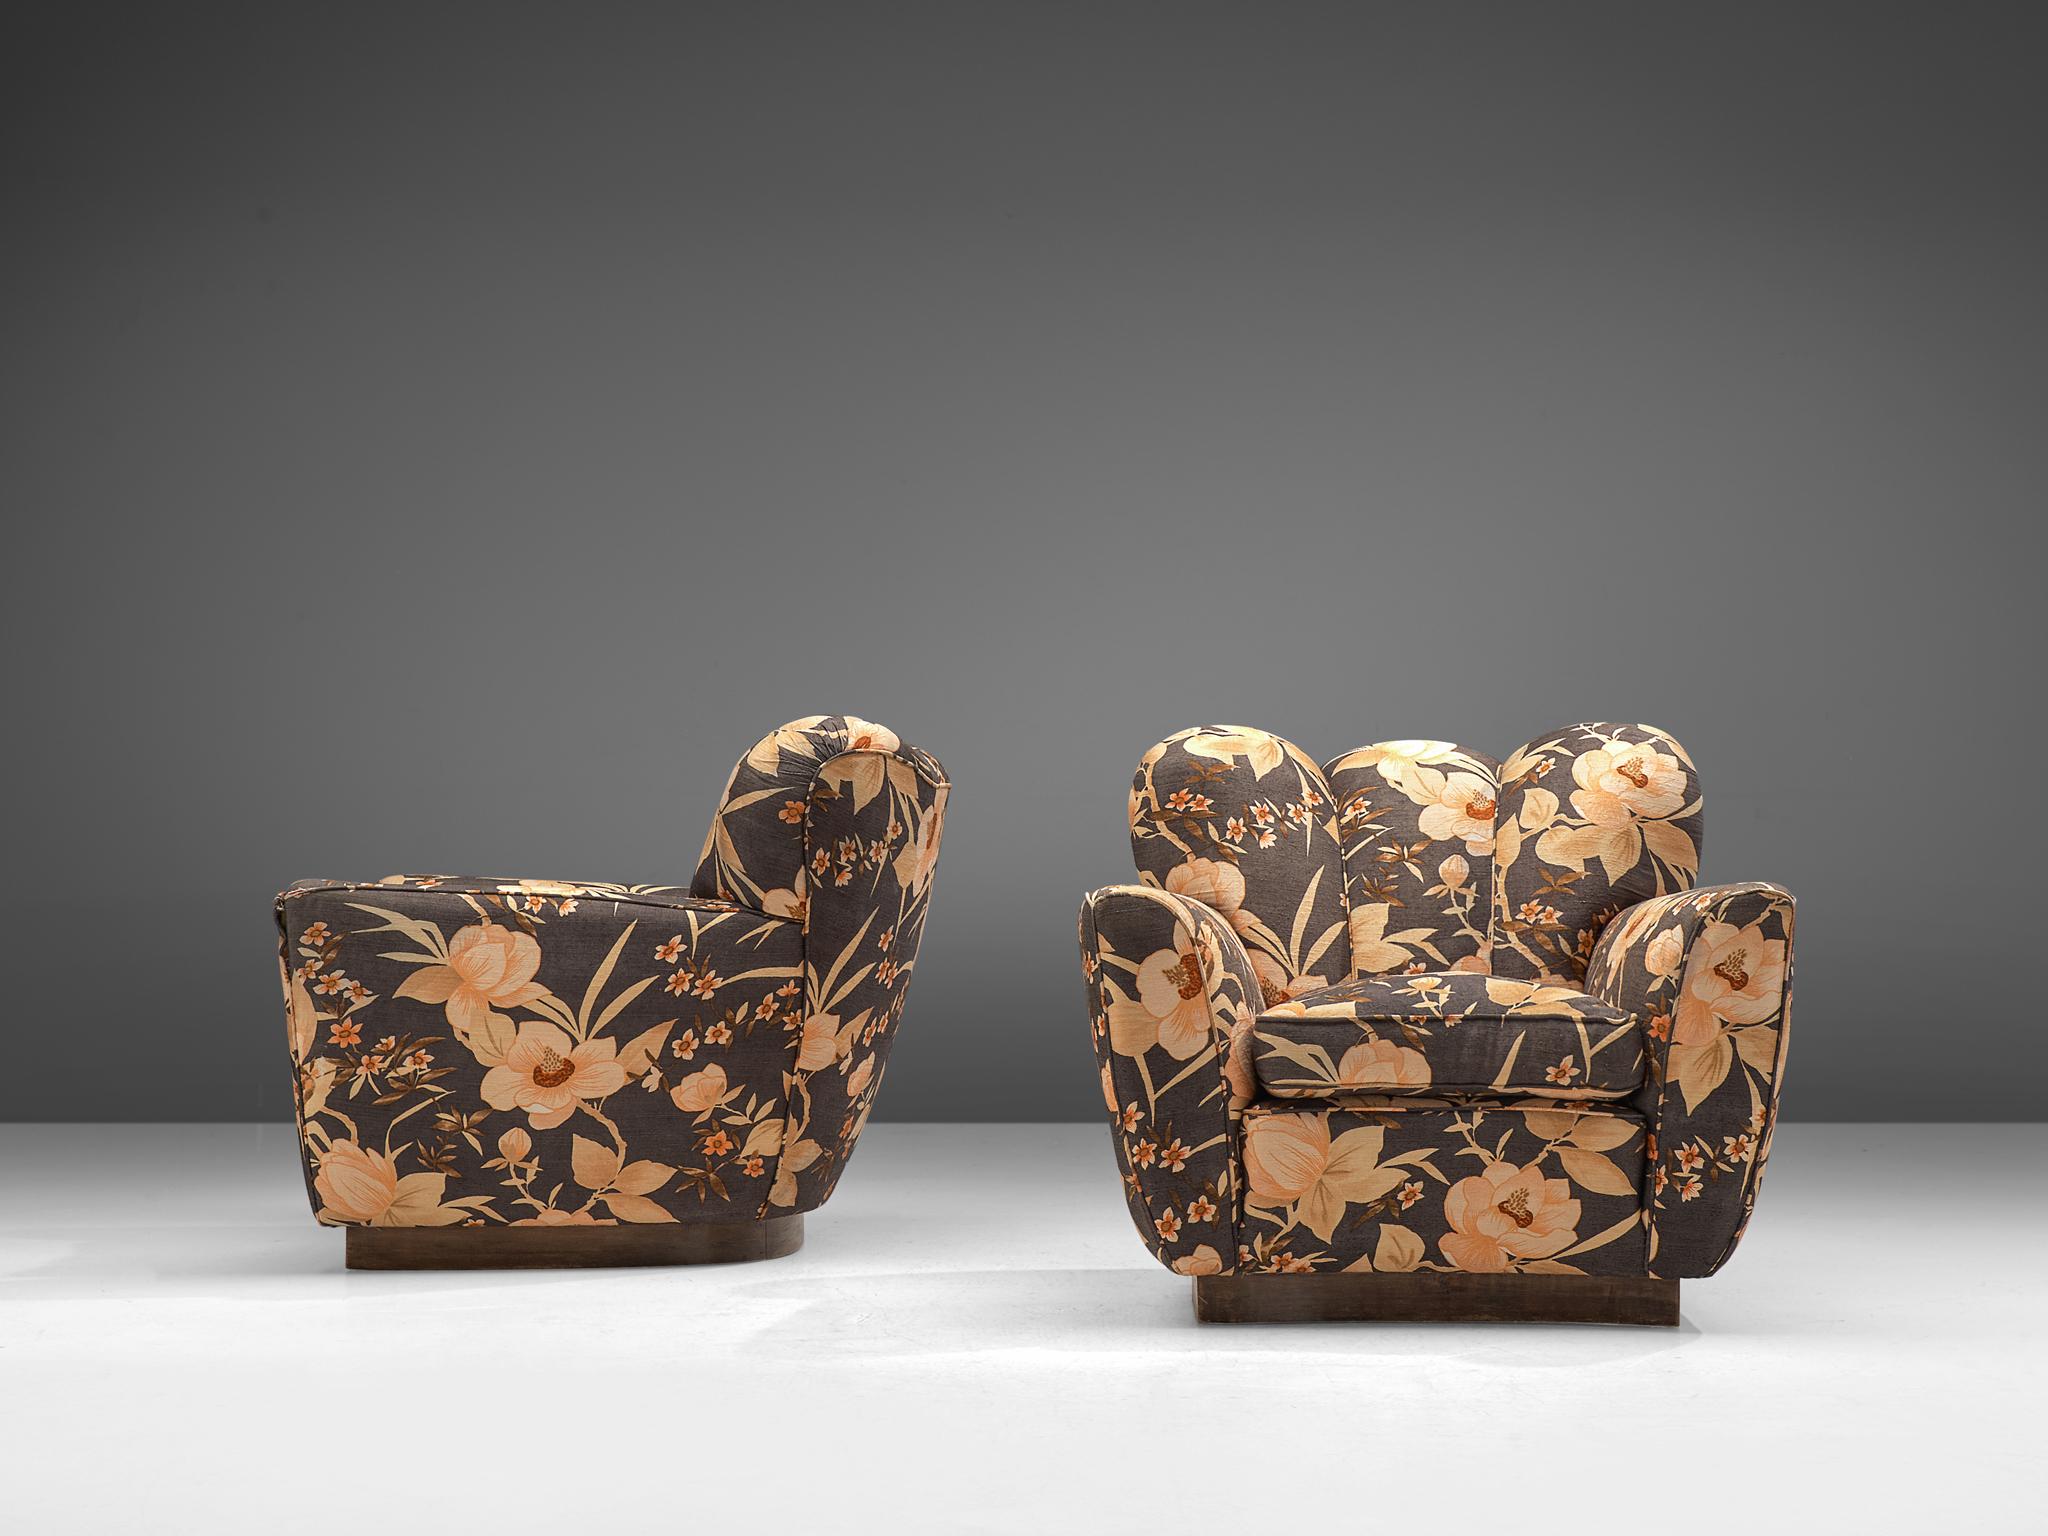 Italian Pair of Lounge Chairs in Floral Upholstery by Molteni (Moderne der Mitte des Jahrhunderts)